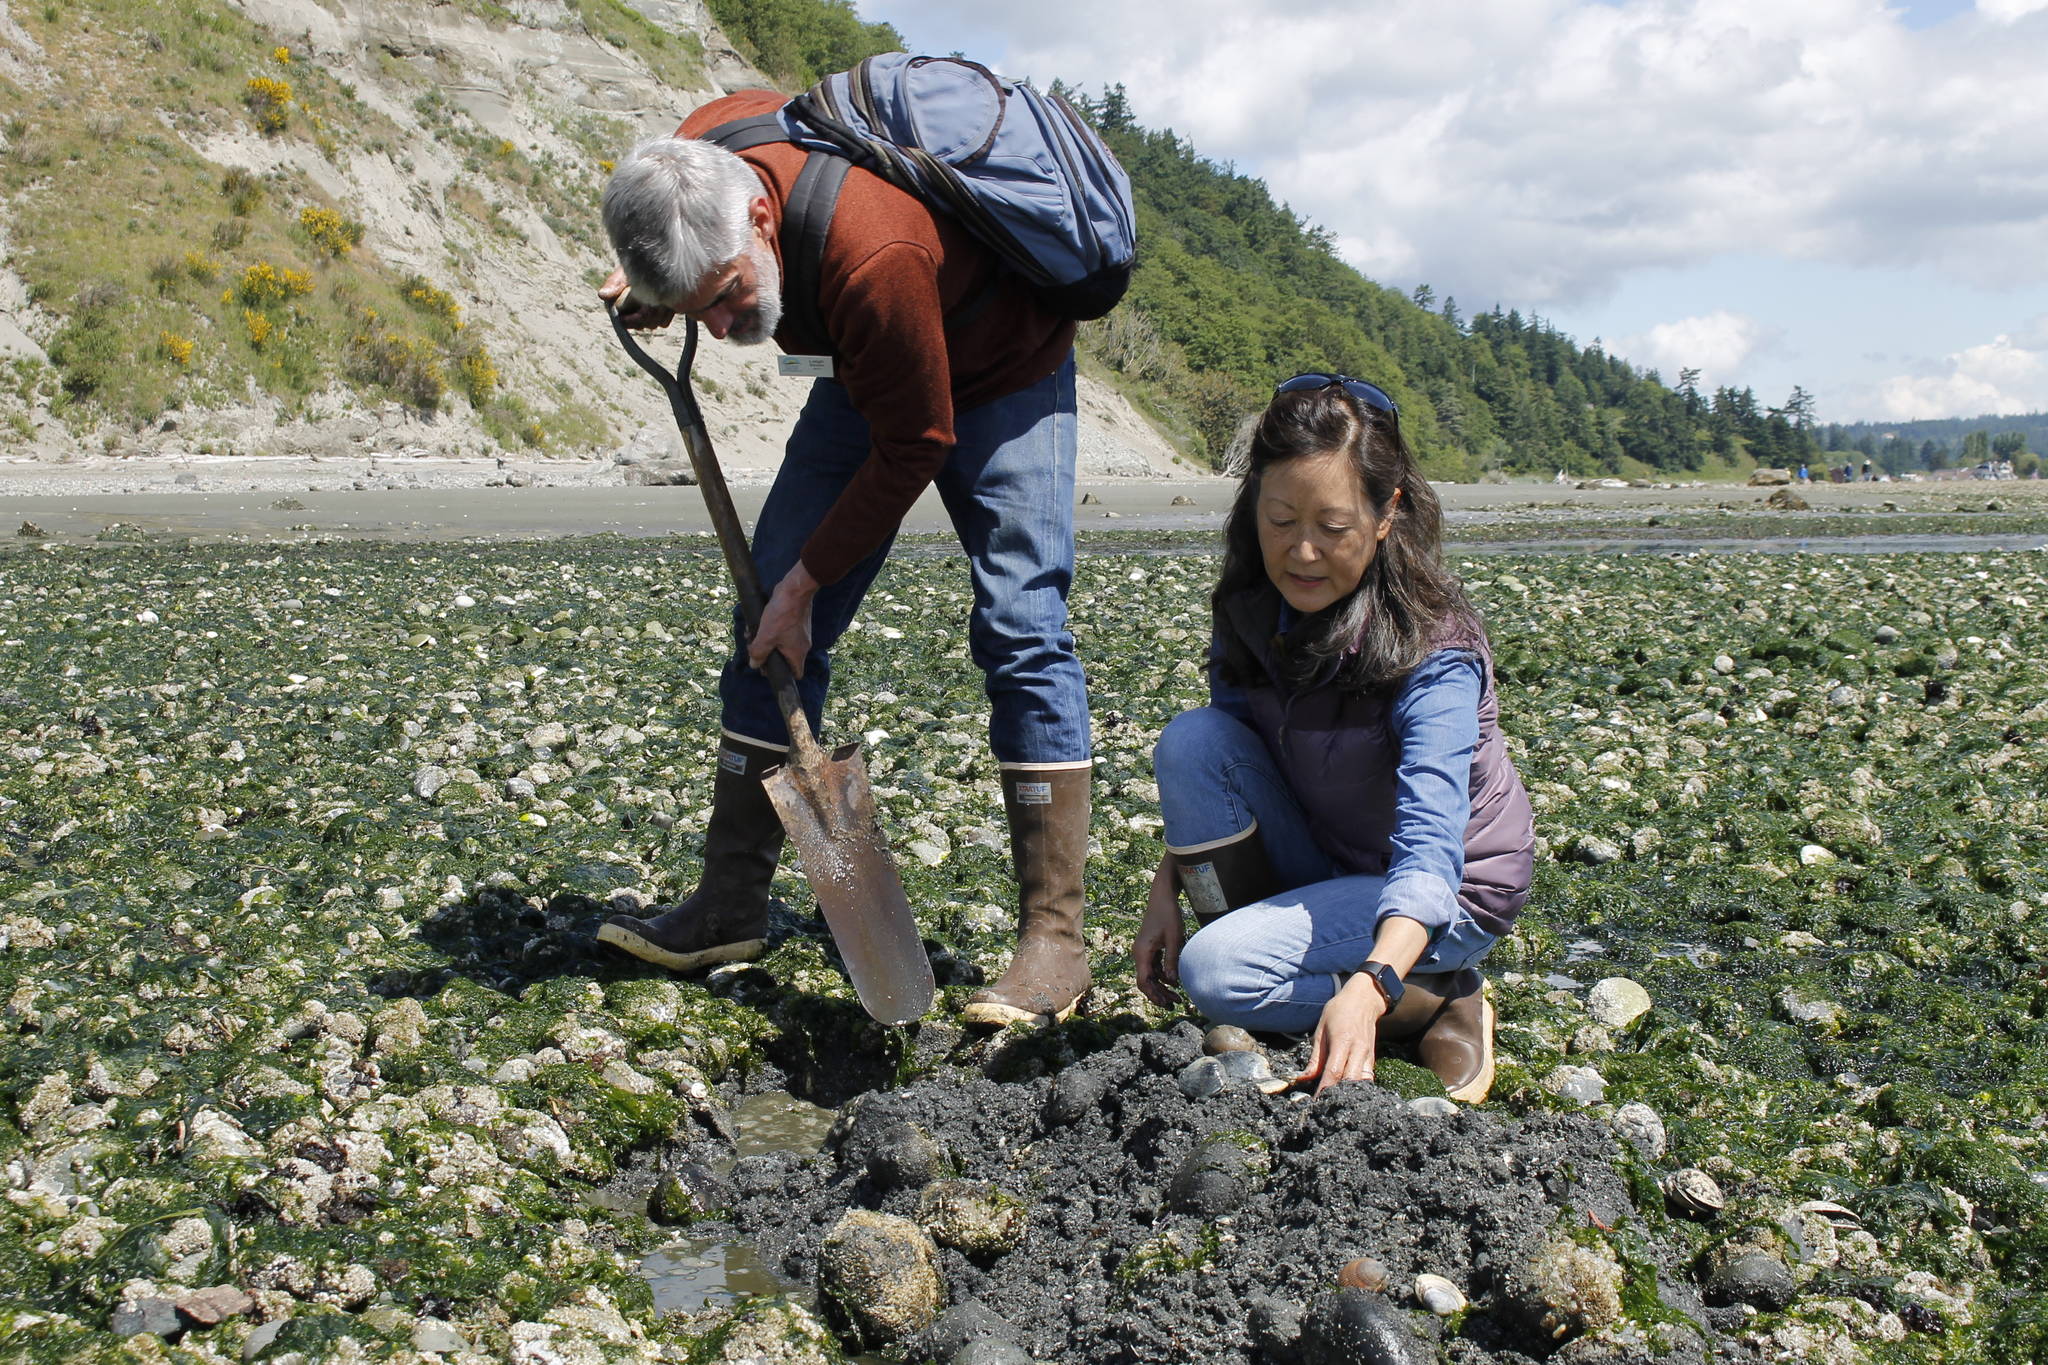 Photo by Kira Erickson
Digging 4 Dinner instructors Leigh Bloom and Michele Sakaguchi search for clams during low tide at Double Bluff Beach.